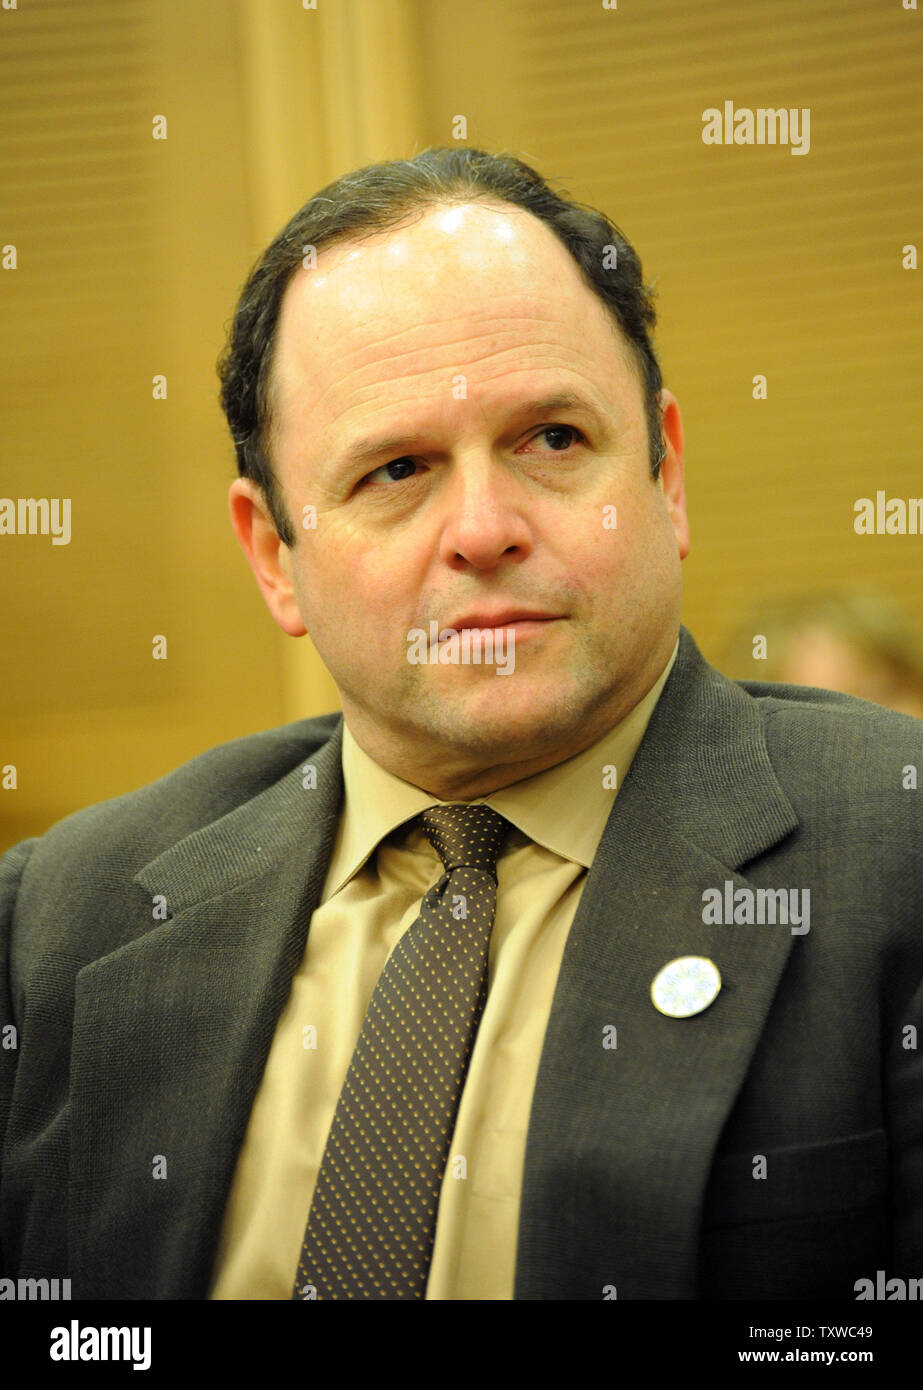 American actor Jason Alexander participates in a debate  in the Israeli Knesset, the Parliament, in Jerusalem, promoting a two-state solution to the Israeli and Palestinian conflict, October 24, 2011.  Alexander, most famous for his role as George Costanza in the hit sitcom Seinfield, is in Israel with the 'One Voice' campaign and will meet with Israeli and Palestinian politicians. UPI/Debbie Hill Stock Photo